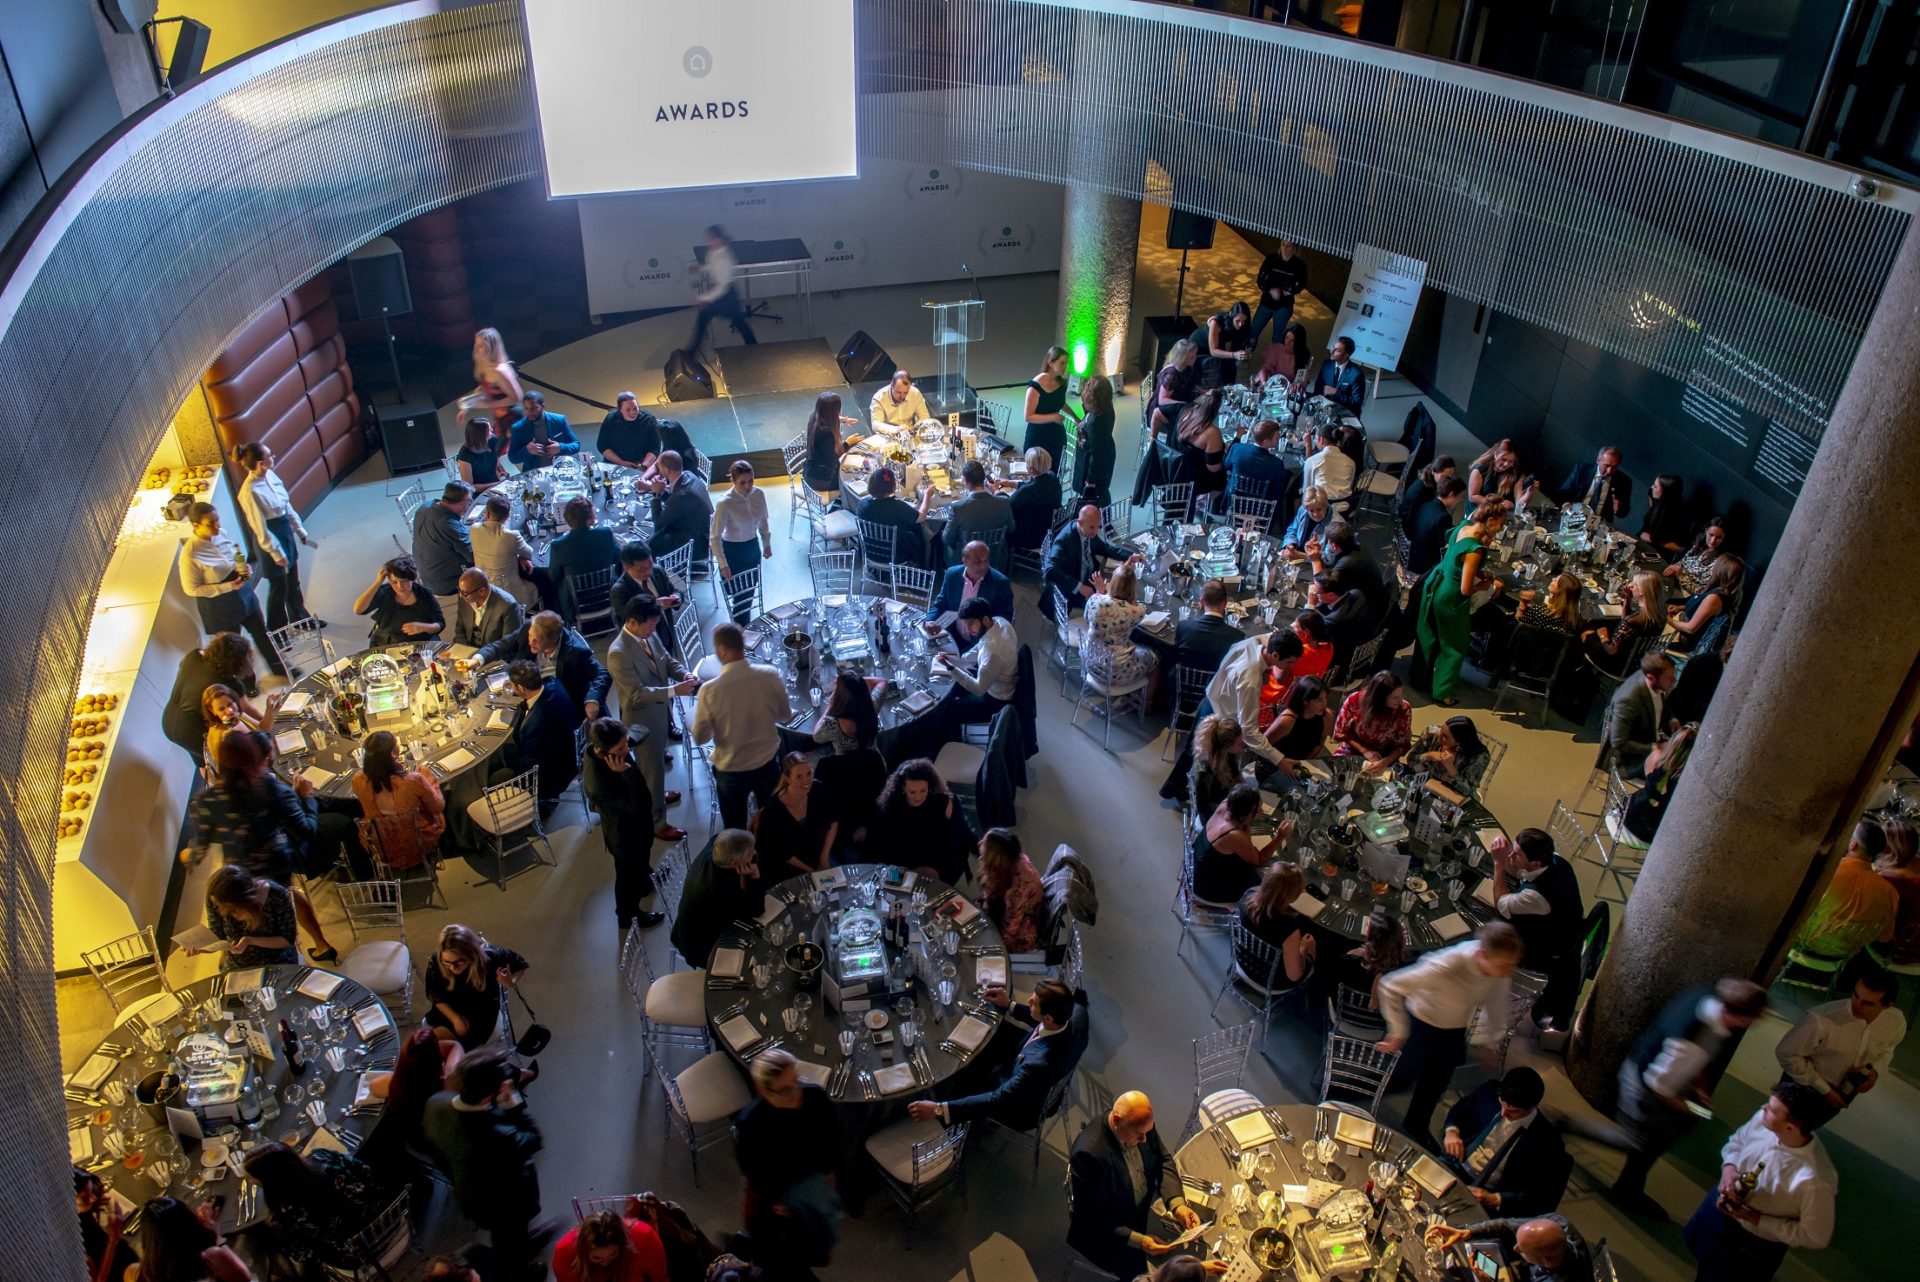 Dinner event at Museum of London